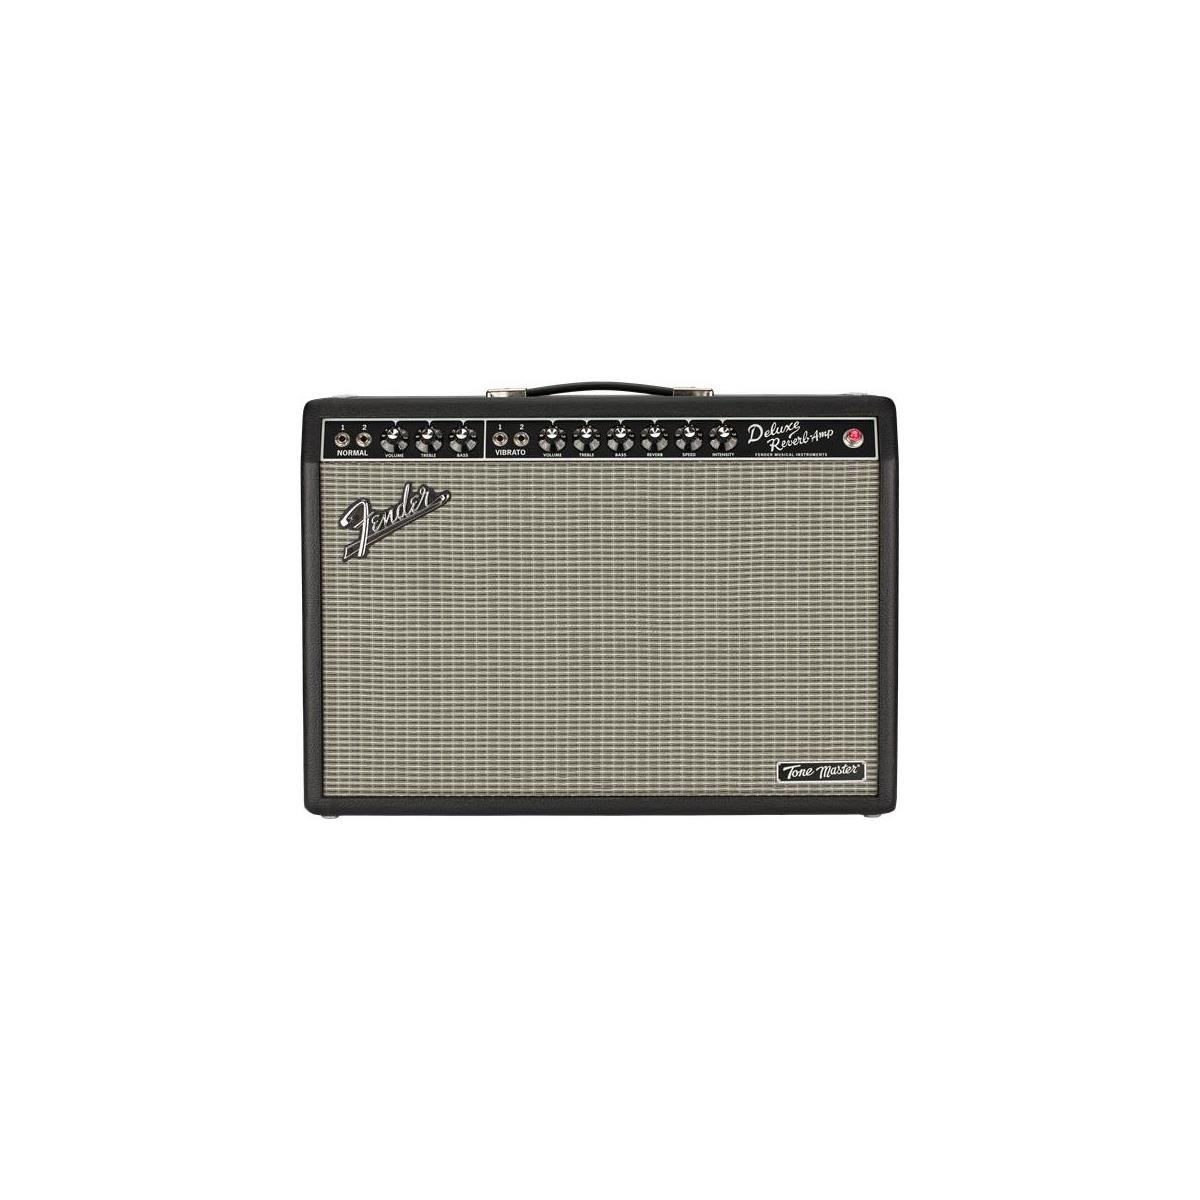 Image of Fender Tone Master 2-Channel 120V 8 Ohms Deluxe Reverb Amplifier